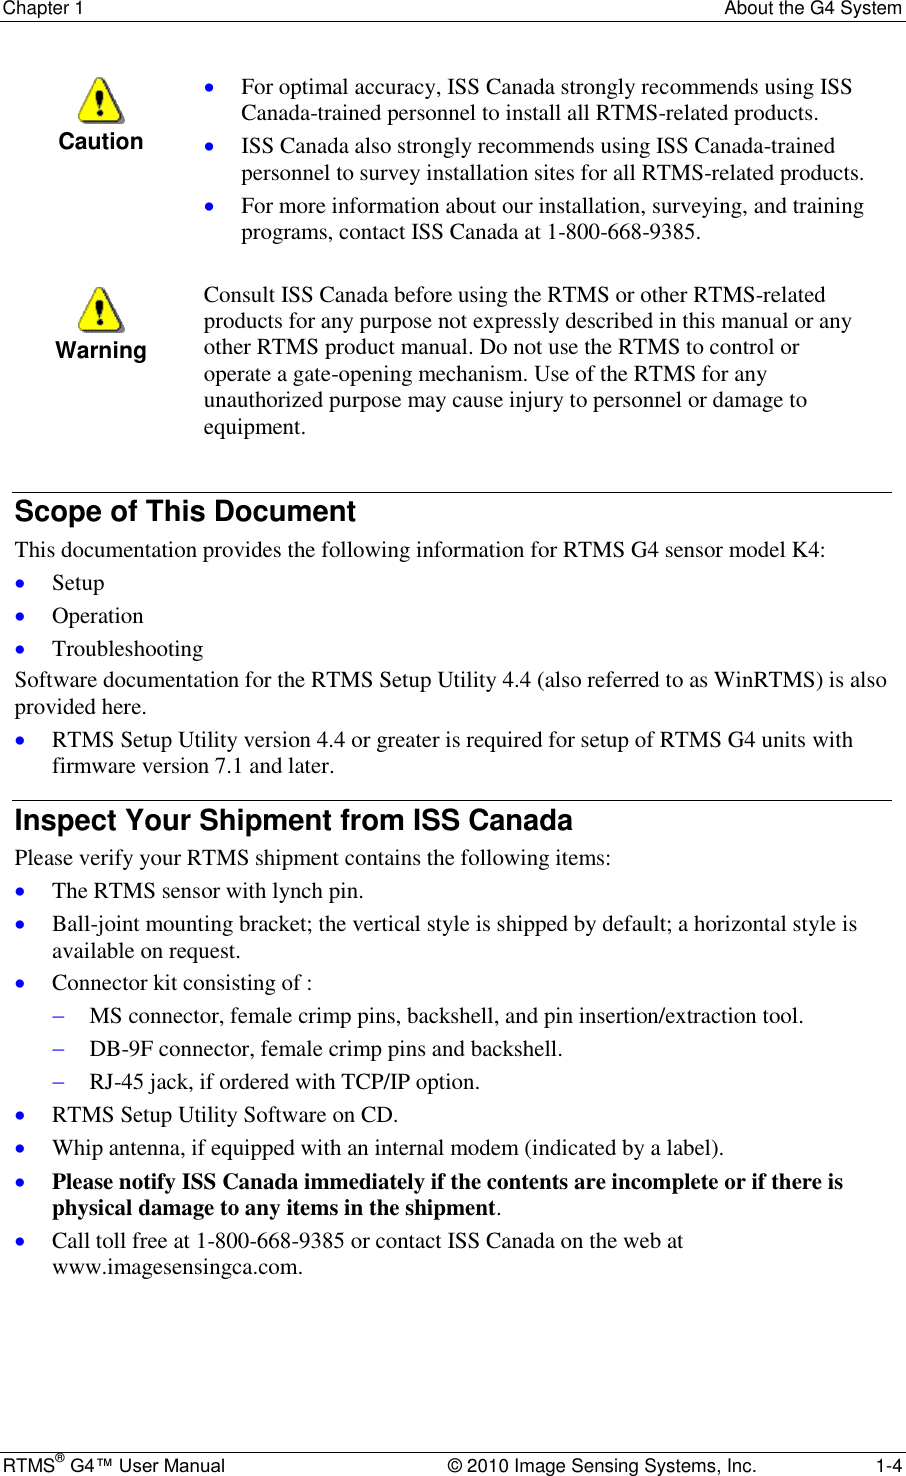 Chapter 1  About the G4 System RTMS® G4™ User Manual  © 2010 Image Sensing Systems, Inc.  1-4  Caution  For optimal accuracy, ISS Canada strongly recommends using ISS Canada-trained personnel to install all RTMS-related products.  ISS Canada also strongly recommends using ISS Canada-trained personnel to survey installation sites for all RTMS-related products.  For more information about our installation, surveying, and training programs, contact ISS Canada at 1-800-668-9385.   Warning Consult ISS Canada before using the RTMS or other RTMS-related products for any purpose not expressly described in this manual or any other RTMS product manual. Do not use the RTMS to control or operate a gate-opening mechanism. Use of the RTMS for any unauthorized purpose may cause injury to personnel or damage to equipment.  Scope of This Document This documentation provides the following information for RTMS G4 sensor model K4:  Setup  Operation  Troubleshooting Software documentation for the RTMS Setup Utility 4.4 (also referred to as WinRTMS) is also provided here.  RTMS Setup Utility version 4.4 or greater is required for setup of RTMS G4 units with firmware version 7.1 and later. Inspect Your Shipment from ISS Canada Please verify your RTMS shipment contains the following items:  The RTMS sensor with lynch pin.  Ball-joint mounting bracket; the vertical style is shipped by default; a horizontal style is available on request.  Connector kit consisting of :   MS connector, female crimp pins, backshell, and pin insertion/extraction tool.  DB-9F connector, female crimp pins and backshell.  RJ-45 jack, if ordered with TCP/IP option.  RTMS Setup Utility Software on CD.  Whip antenna, if equipped with an internal modem (indicated by a label).  Please notify ISS Canada immediately if the contents are incomplete or if there is physical damage to any items in the shipment.  Call toll free at 1-800-668-9385 or contact ISS Canada on the web at www.imagesensingca.com. 